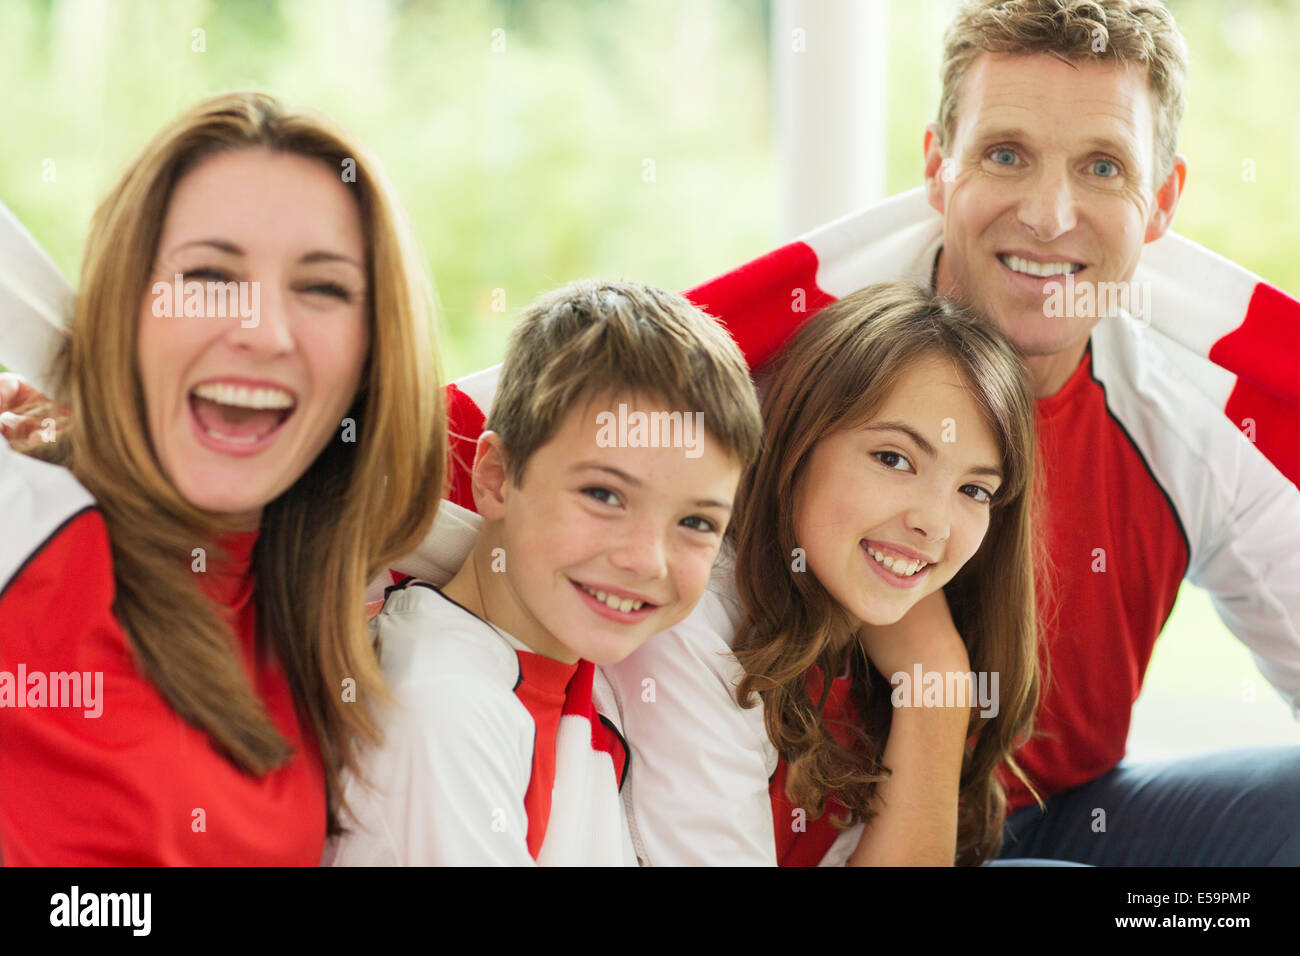 Family in sports jerseys cheering in living room Stock Photo